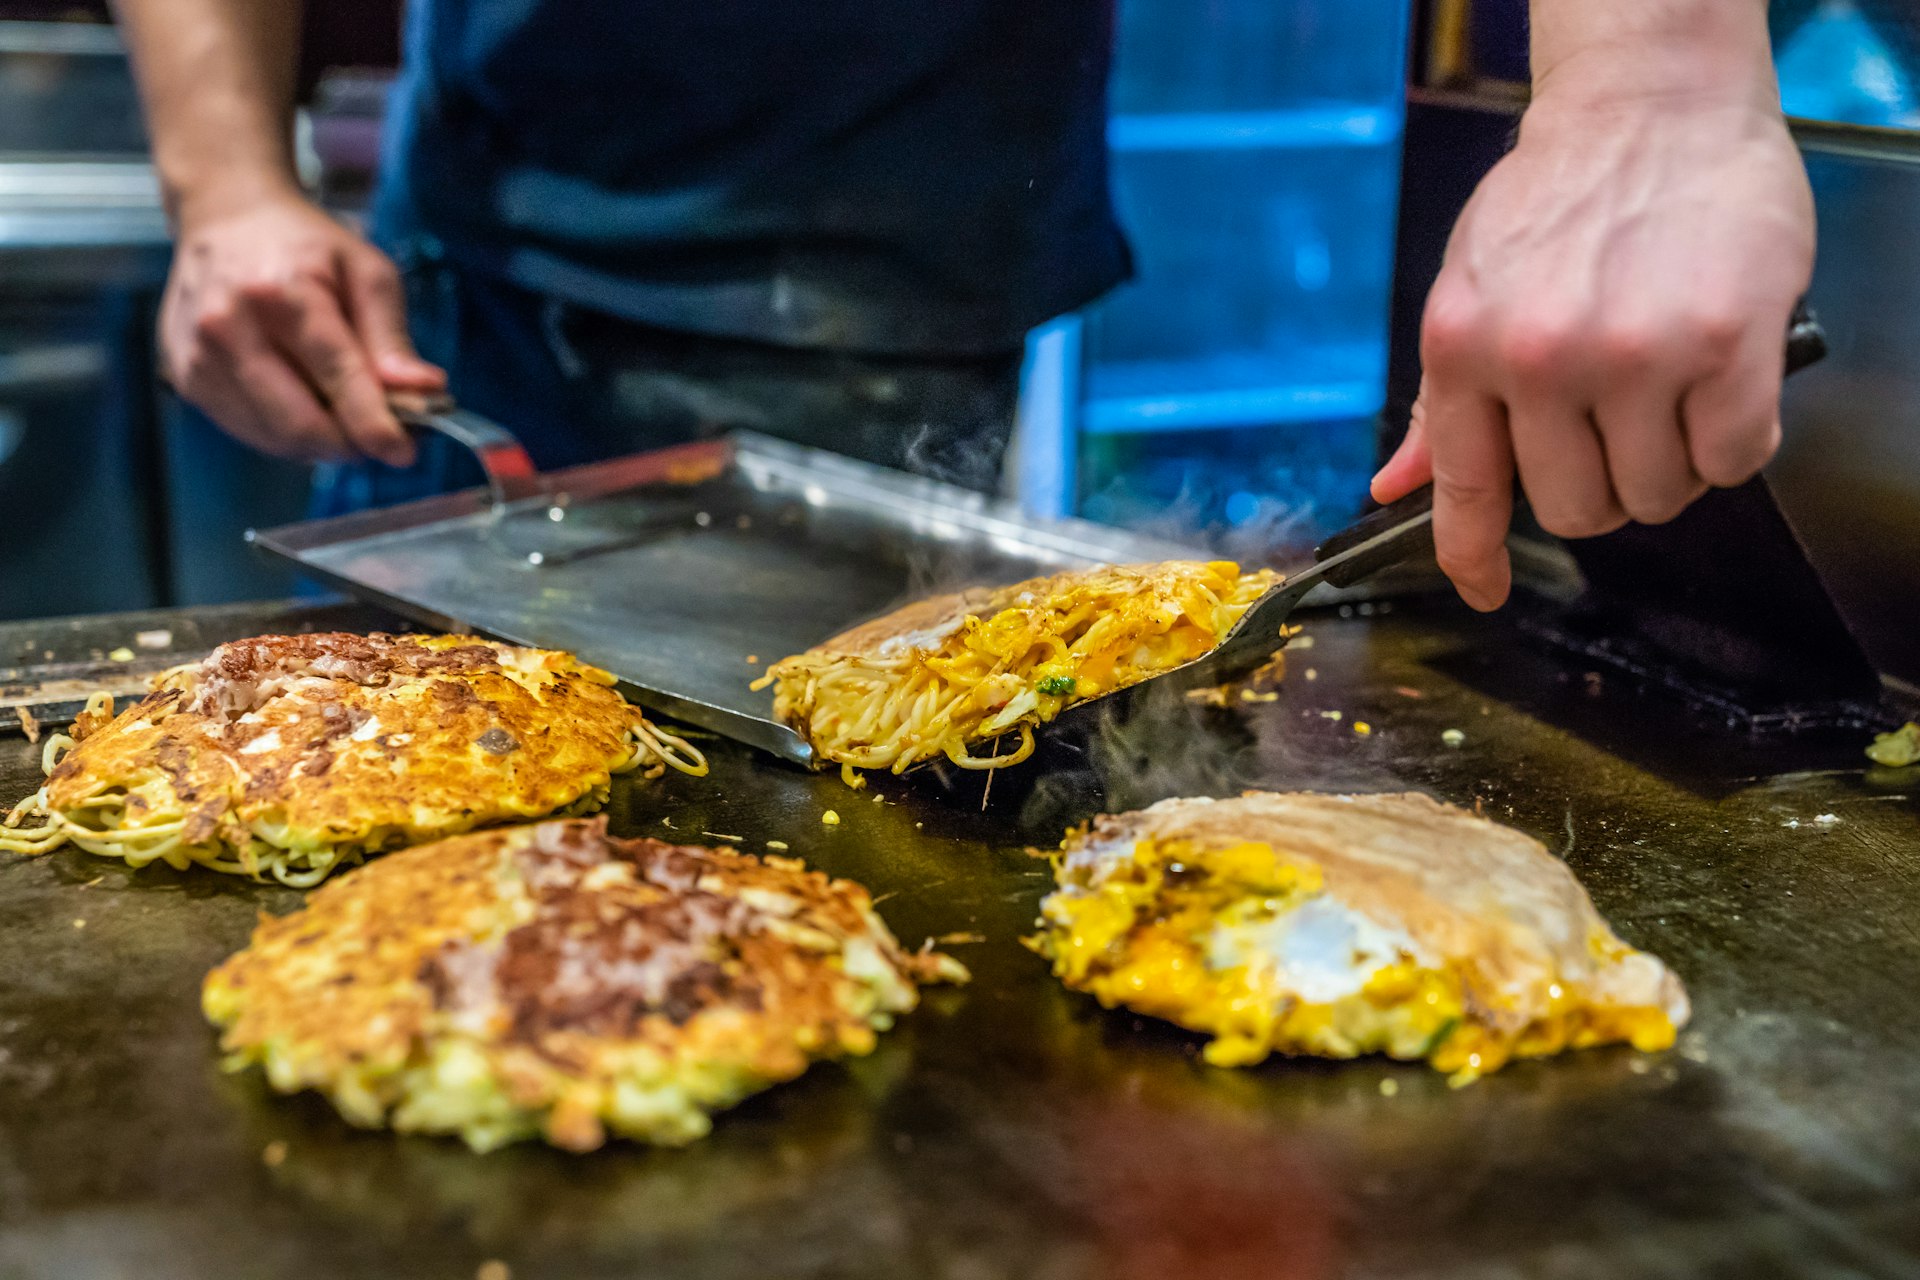 A cheg uses two flat spatulas to shift cabbage-based omelettes around on a hot plate